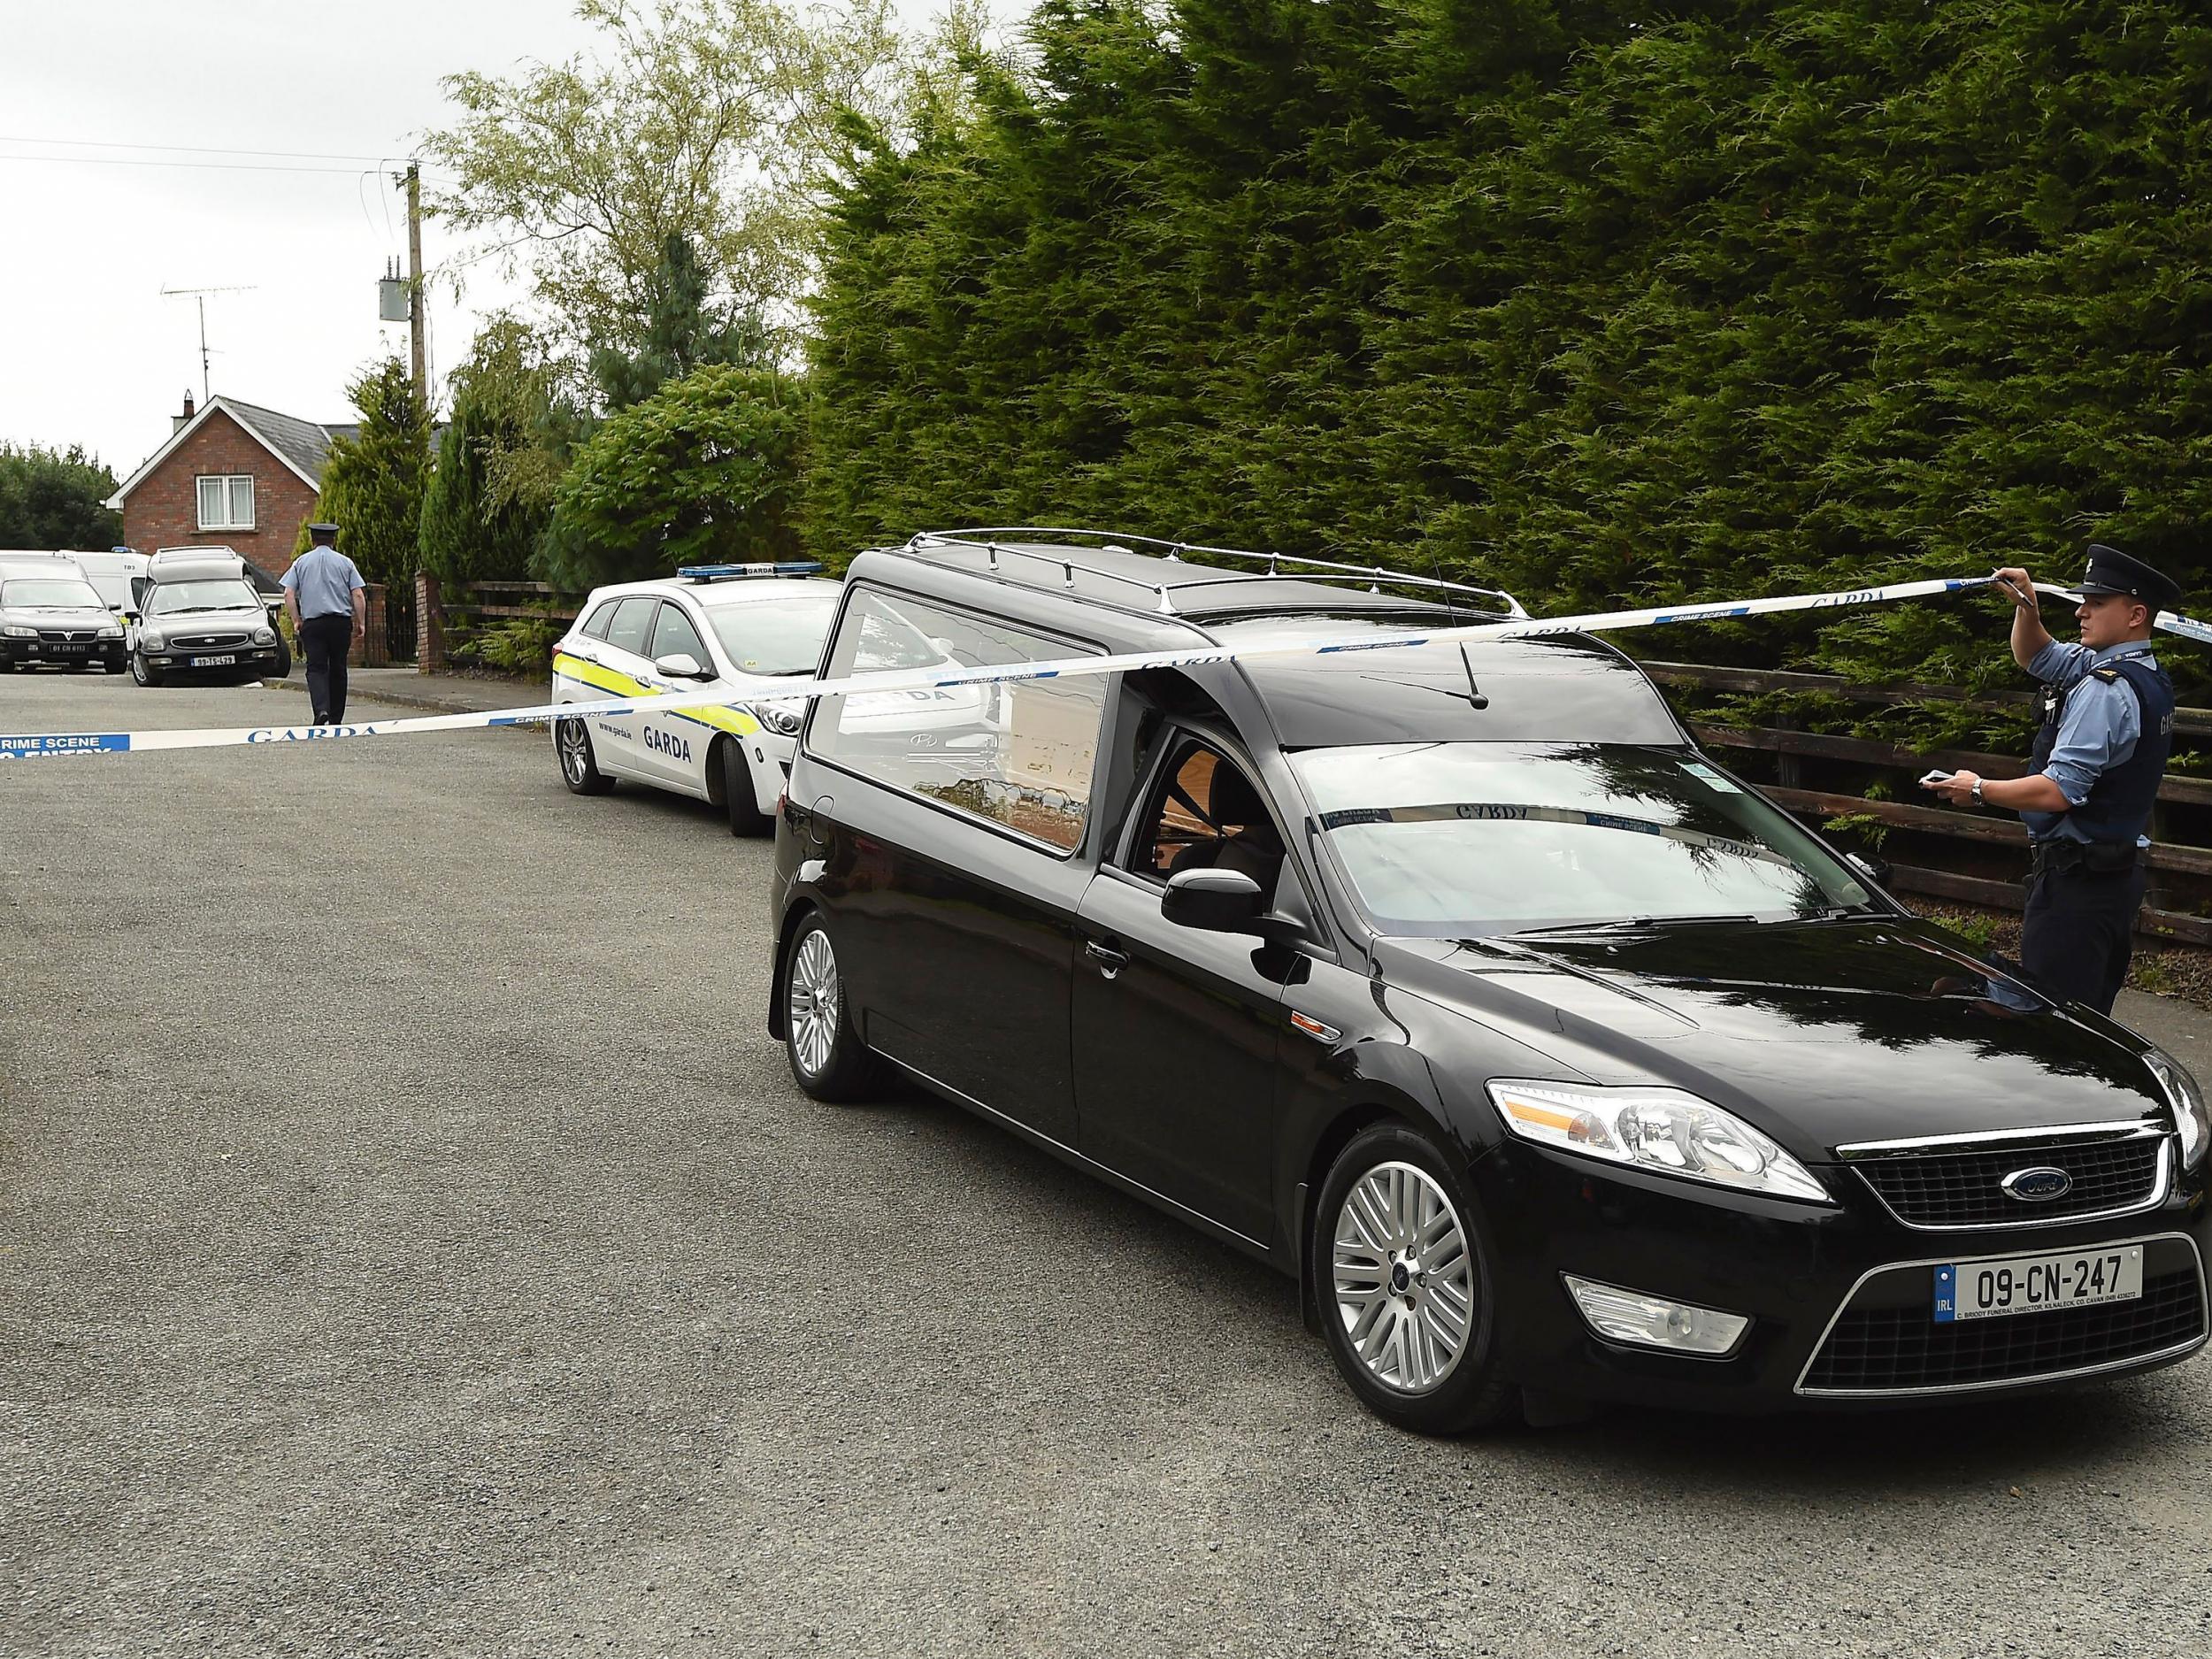 A Garda technical officer lifts tape as a hearse leaves the scene at Oakdene, Barconey, Ballyjamesduff in Cavan, where a family of five were found dead in their countryside home